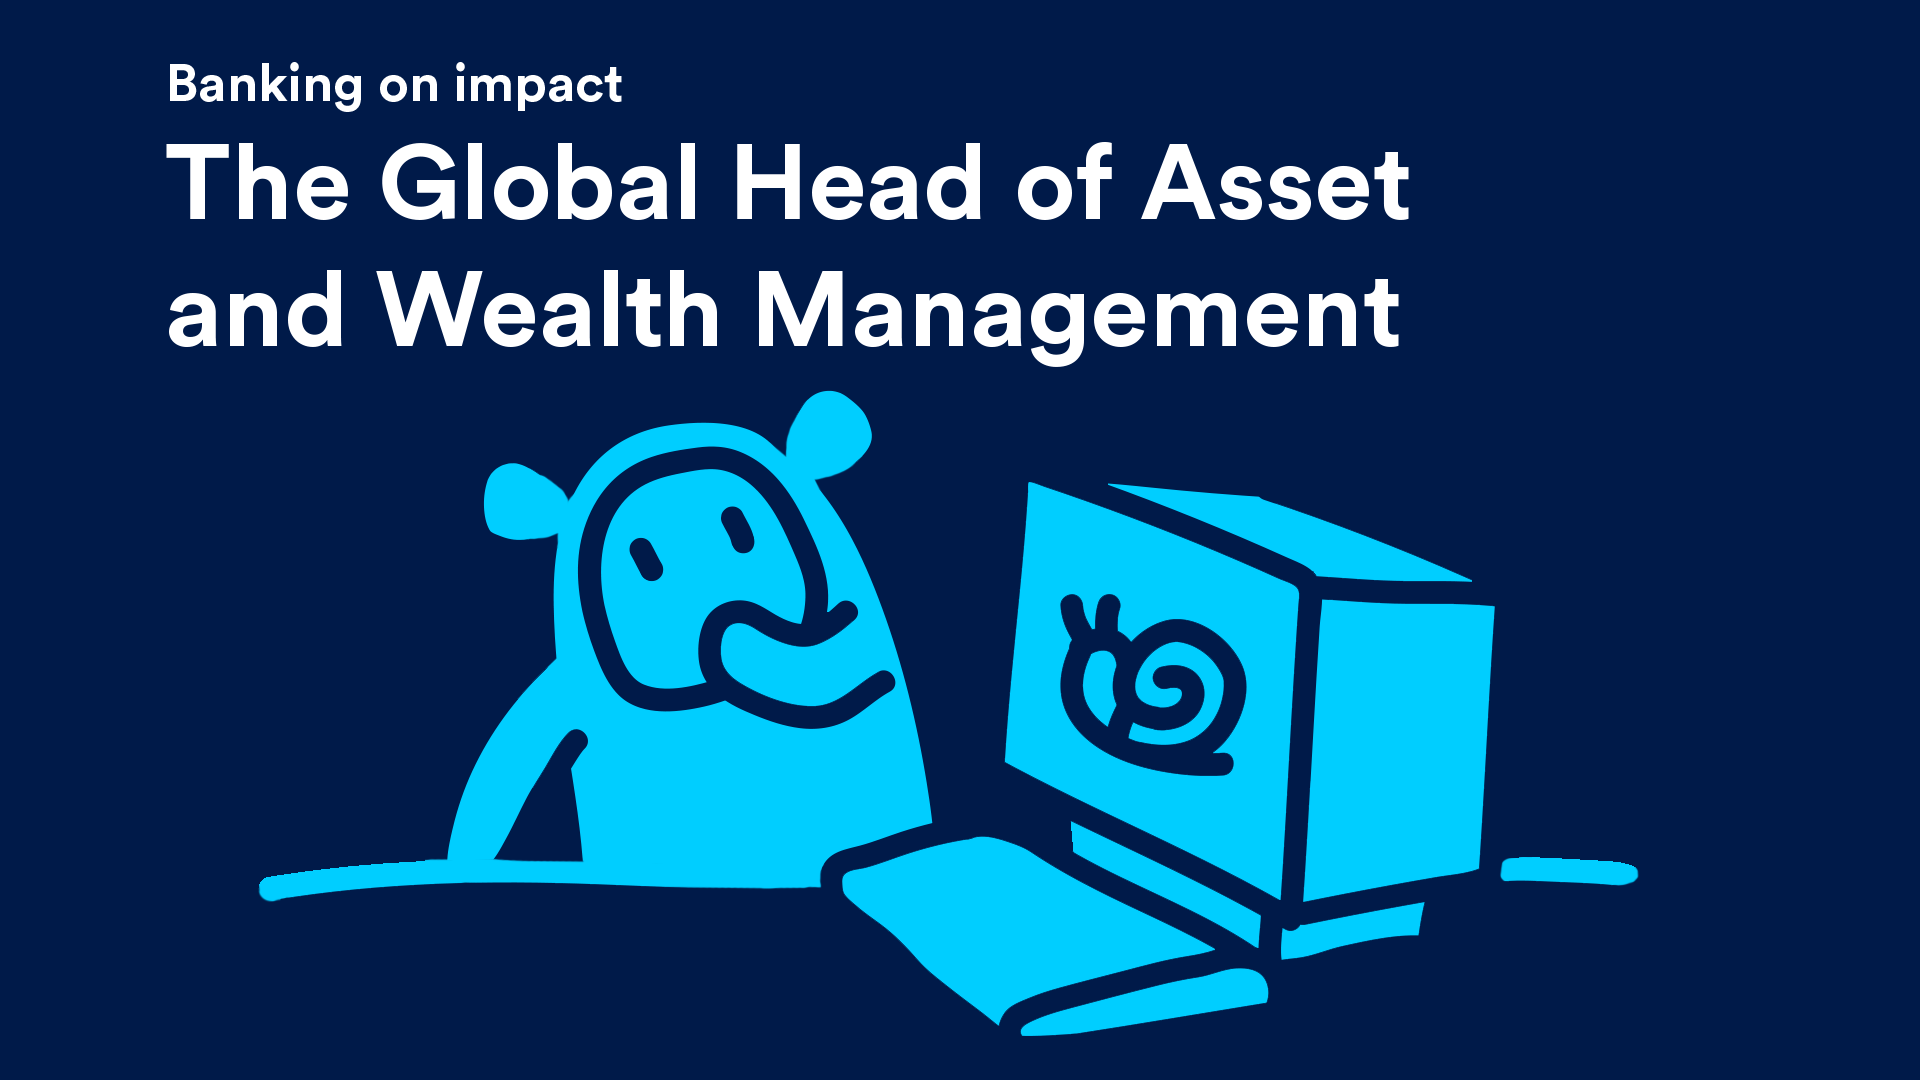 The Global Head of Asset and Wealth Management